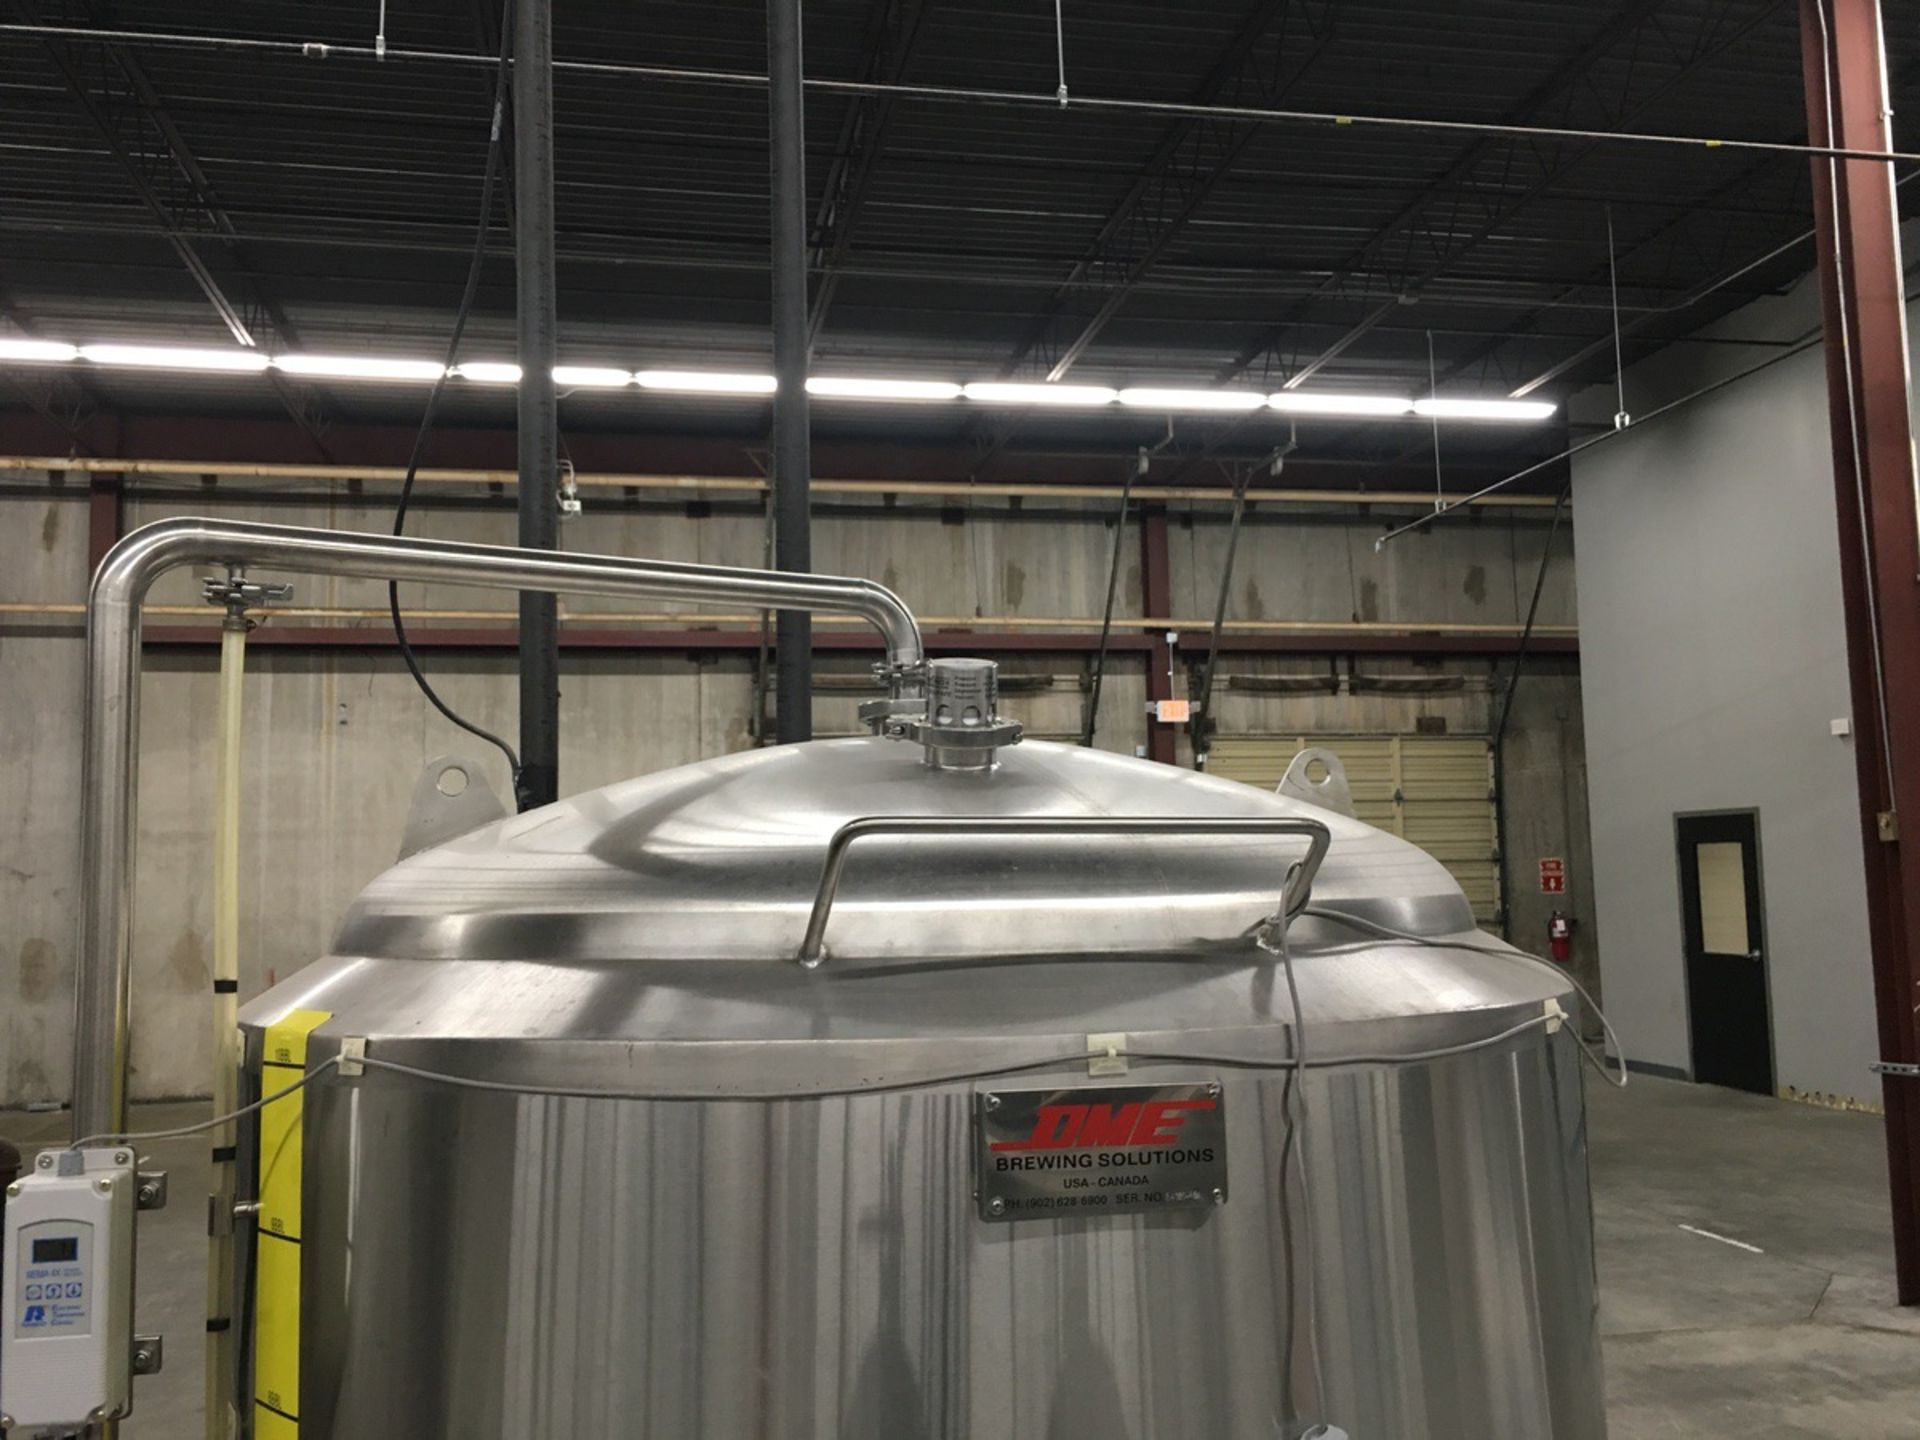 2015 DME 10 BBL Stainless Steel Brite Tank, Jacketed, | Subject to Bulk Lot 1 | Rig Fee: $325 - Image 3 of 10